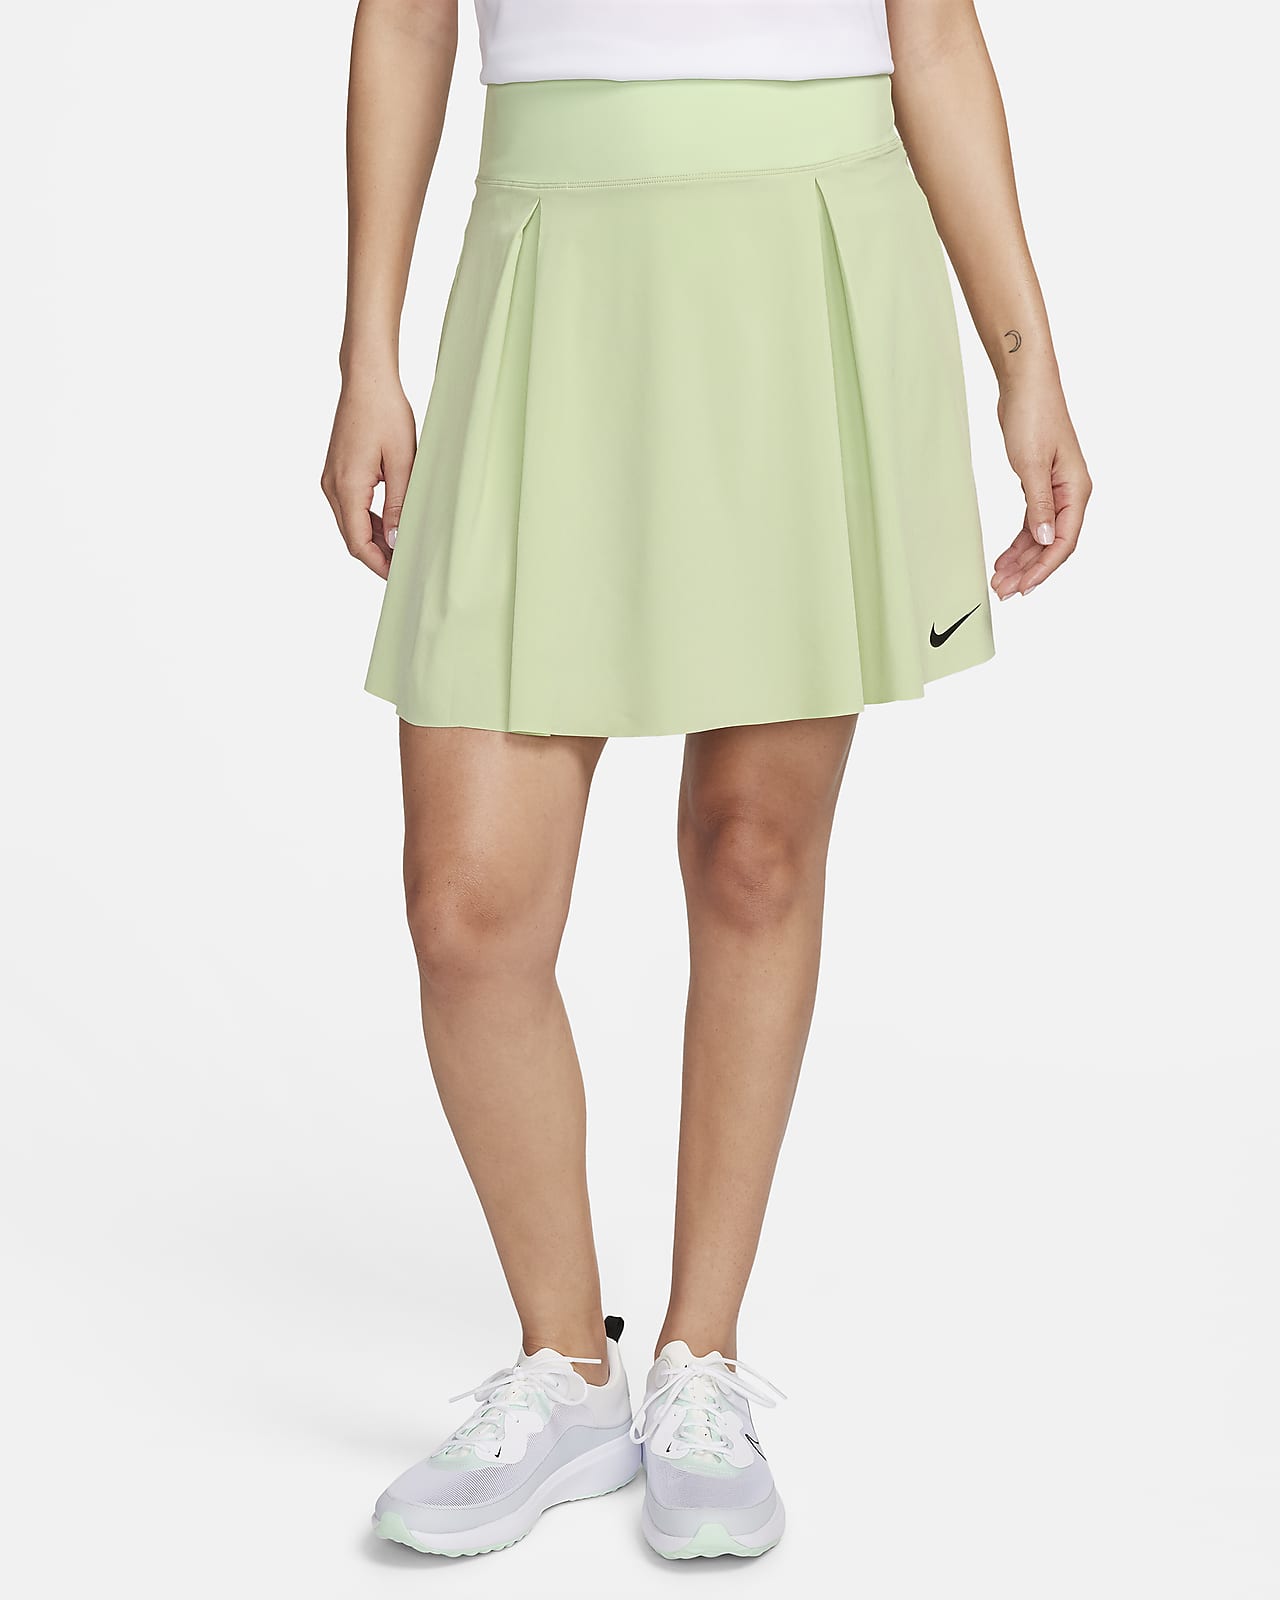 Women's Skorts with Pockets: Pacific Performance Pull-On